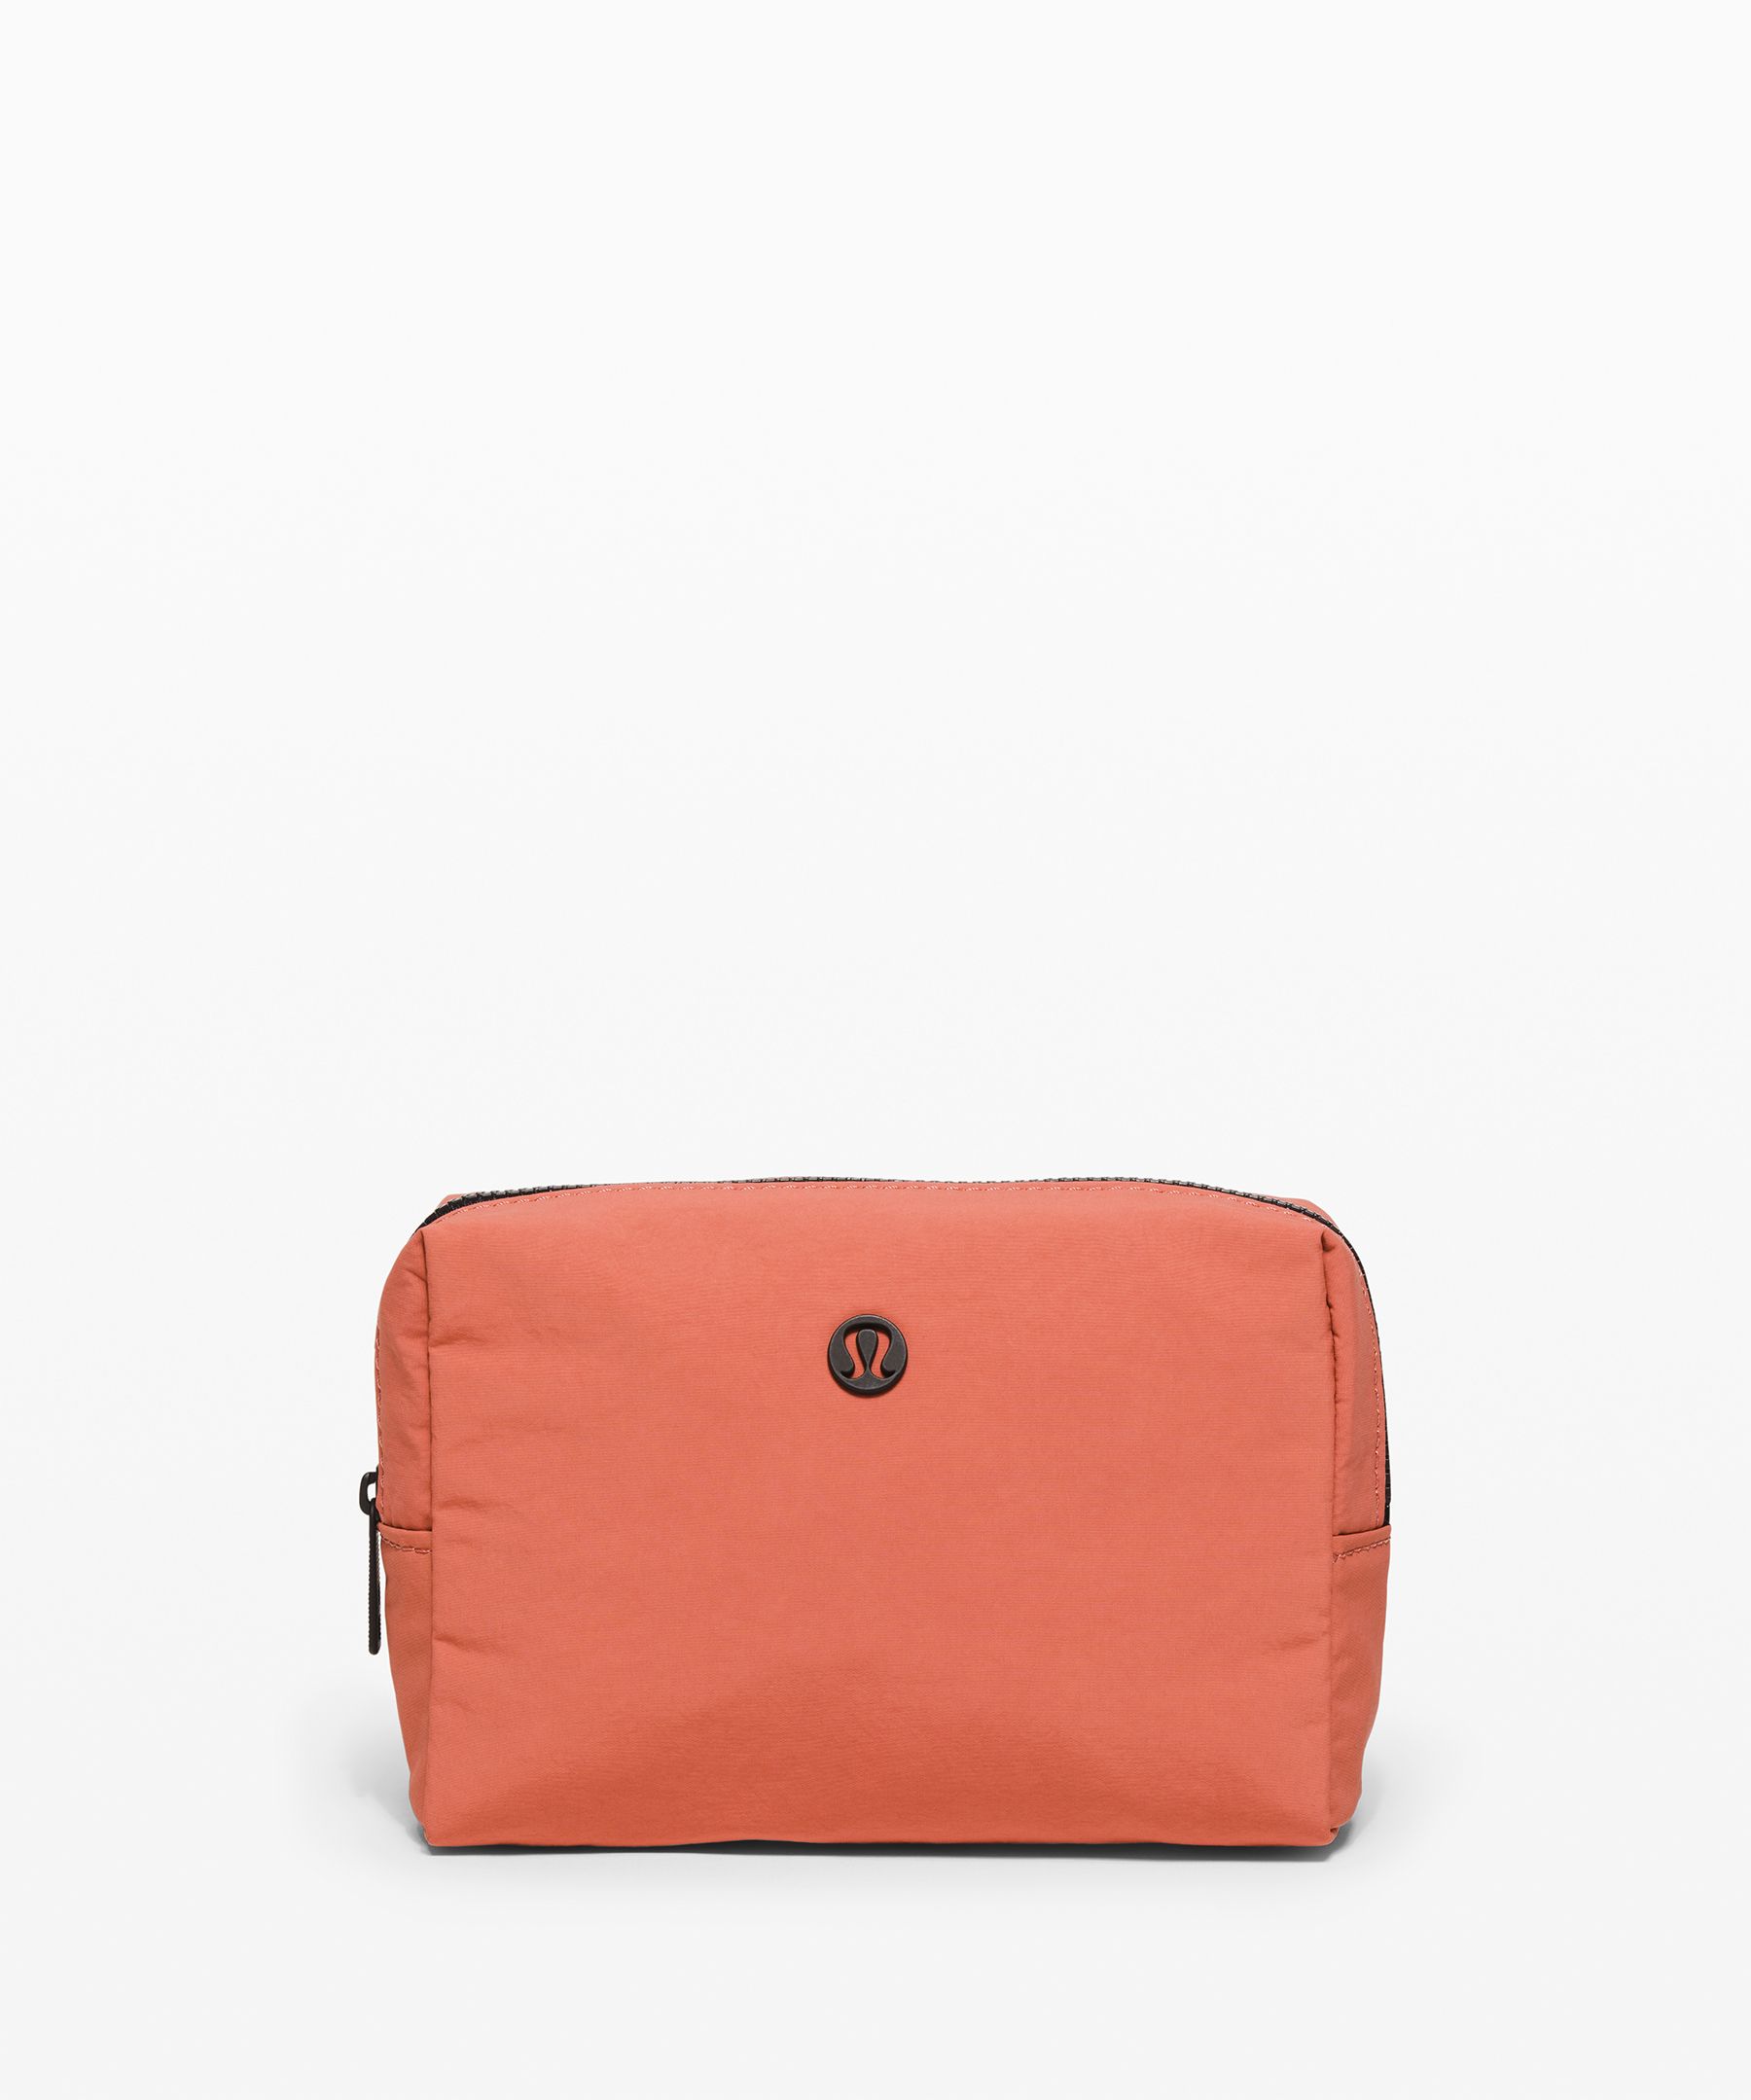 all your small things pouch lululemon